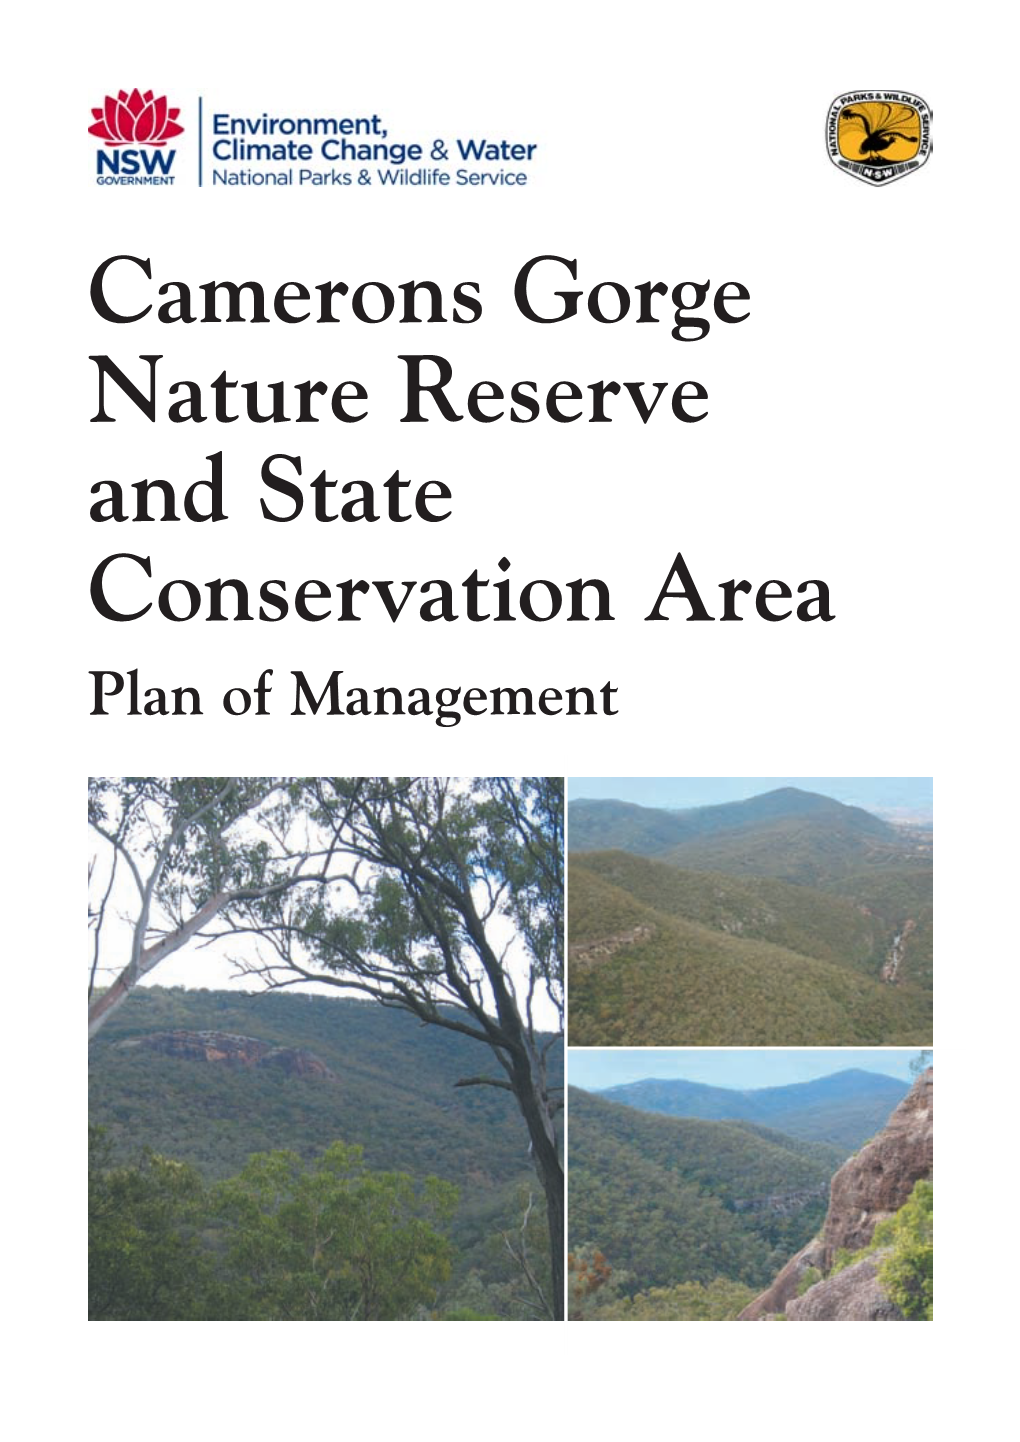 Camerons Gorge Nature Reserve and State Conservation Area Plan of Management